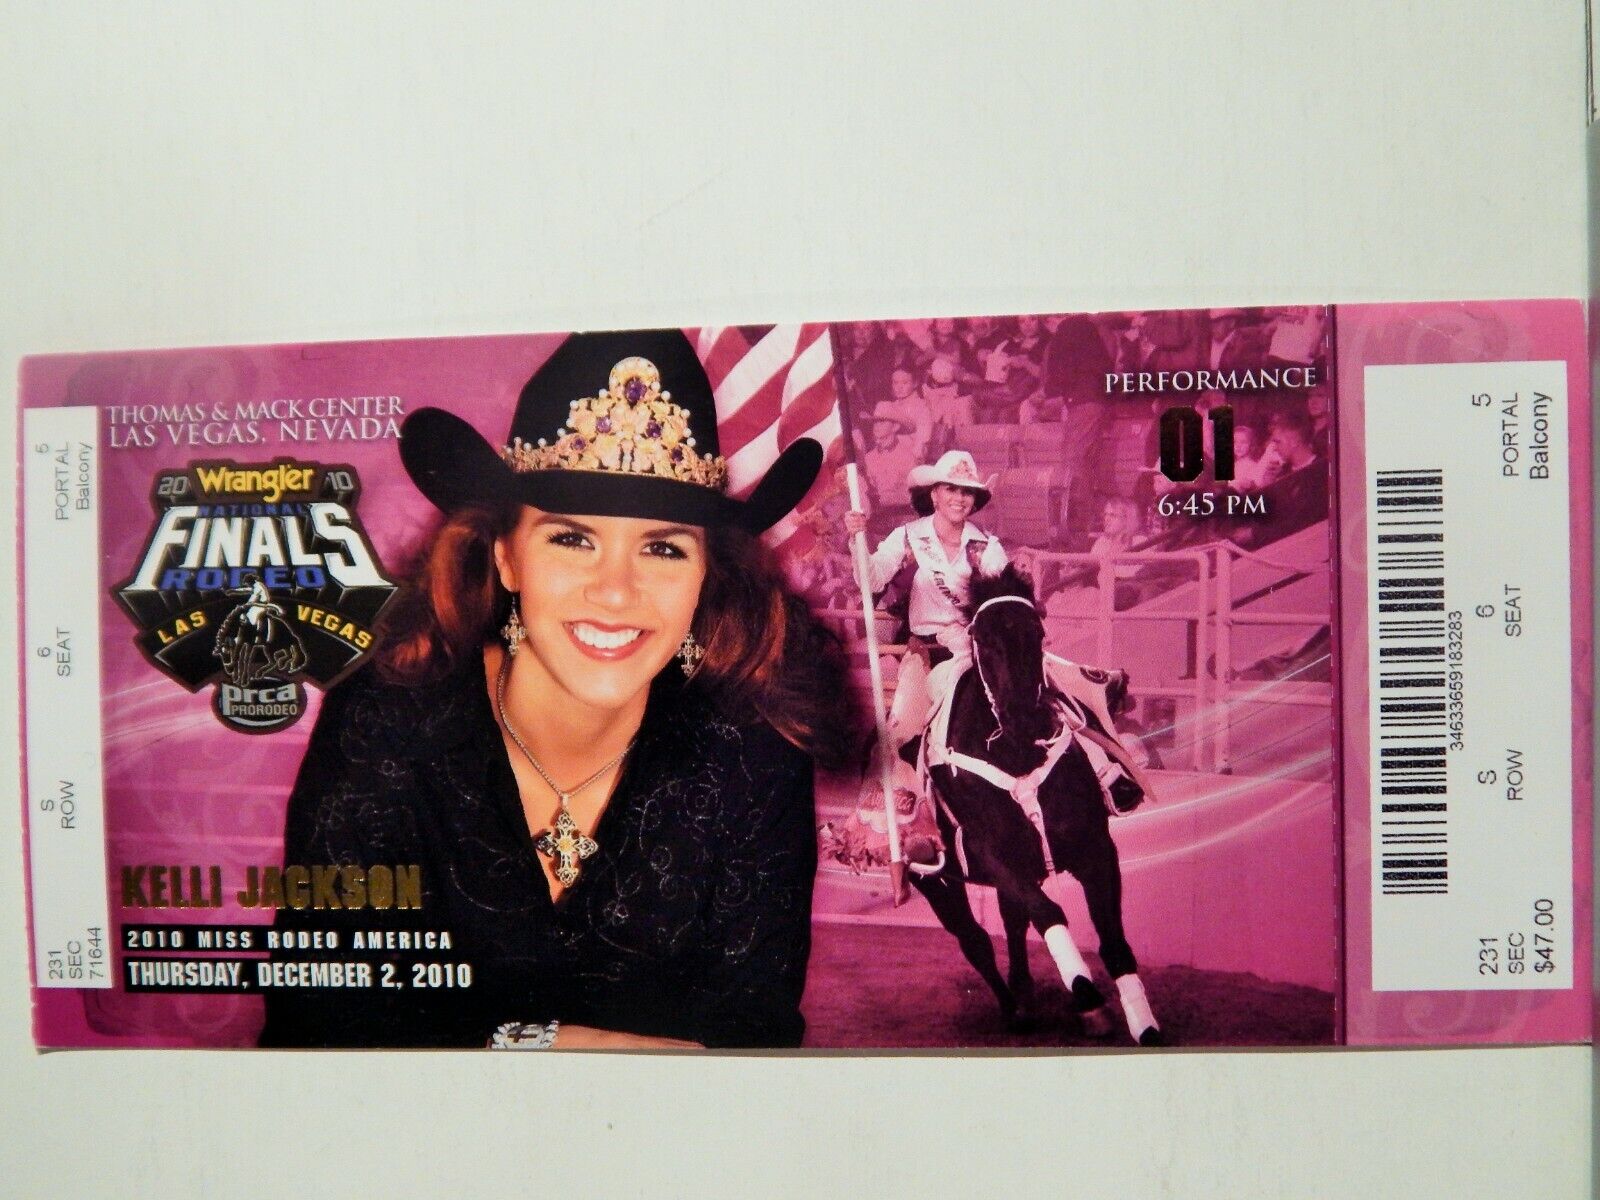 2010 NATIONAL FINALS RODEO LG ORIGINAL USED TICKET KELLI JACKSON COLOR Photo Poster painting